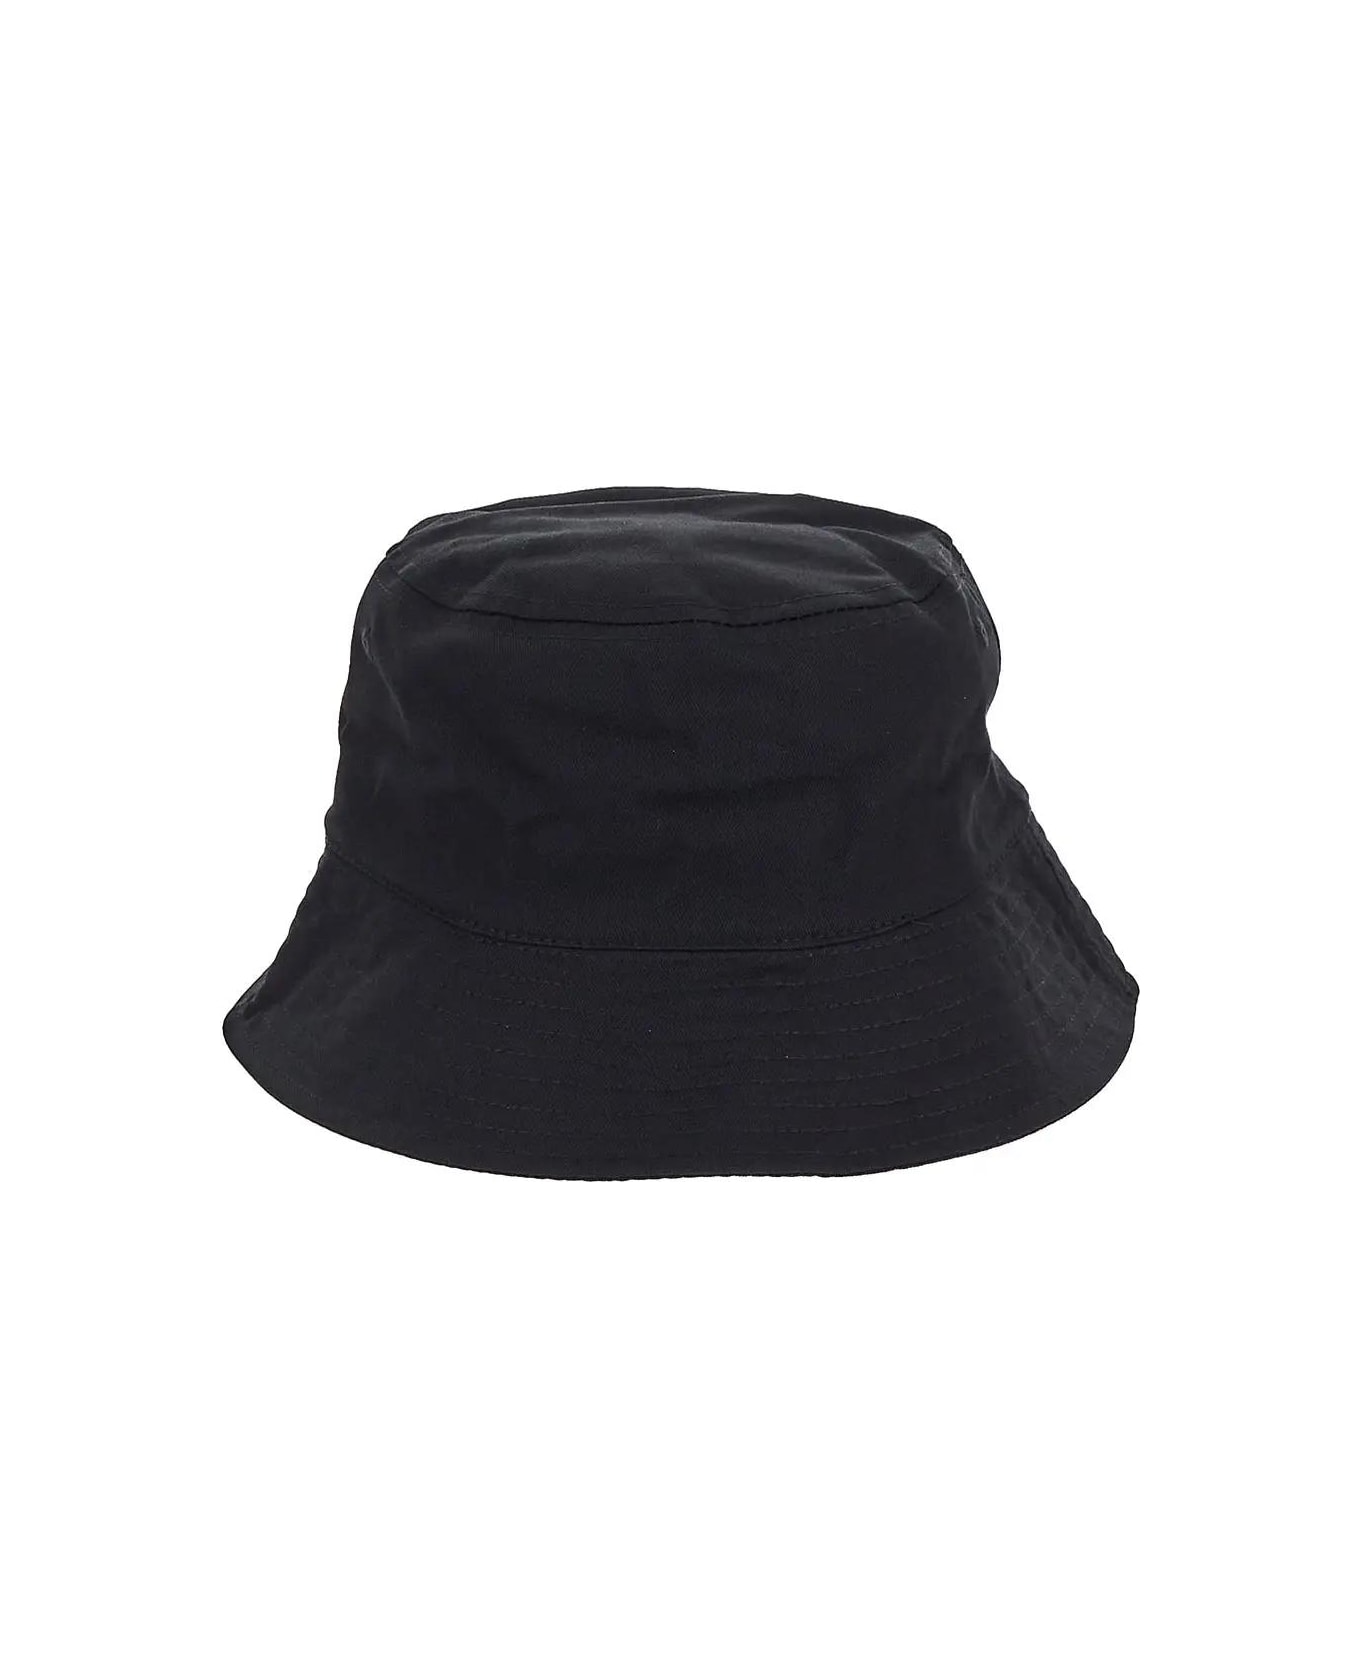 Versace Jeans Couture Hat - BLACK/WHITE 帽子